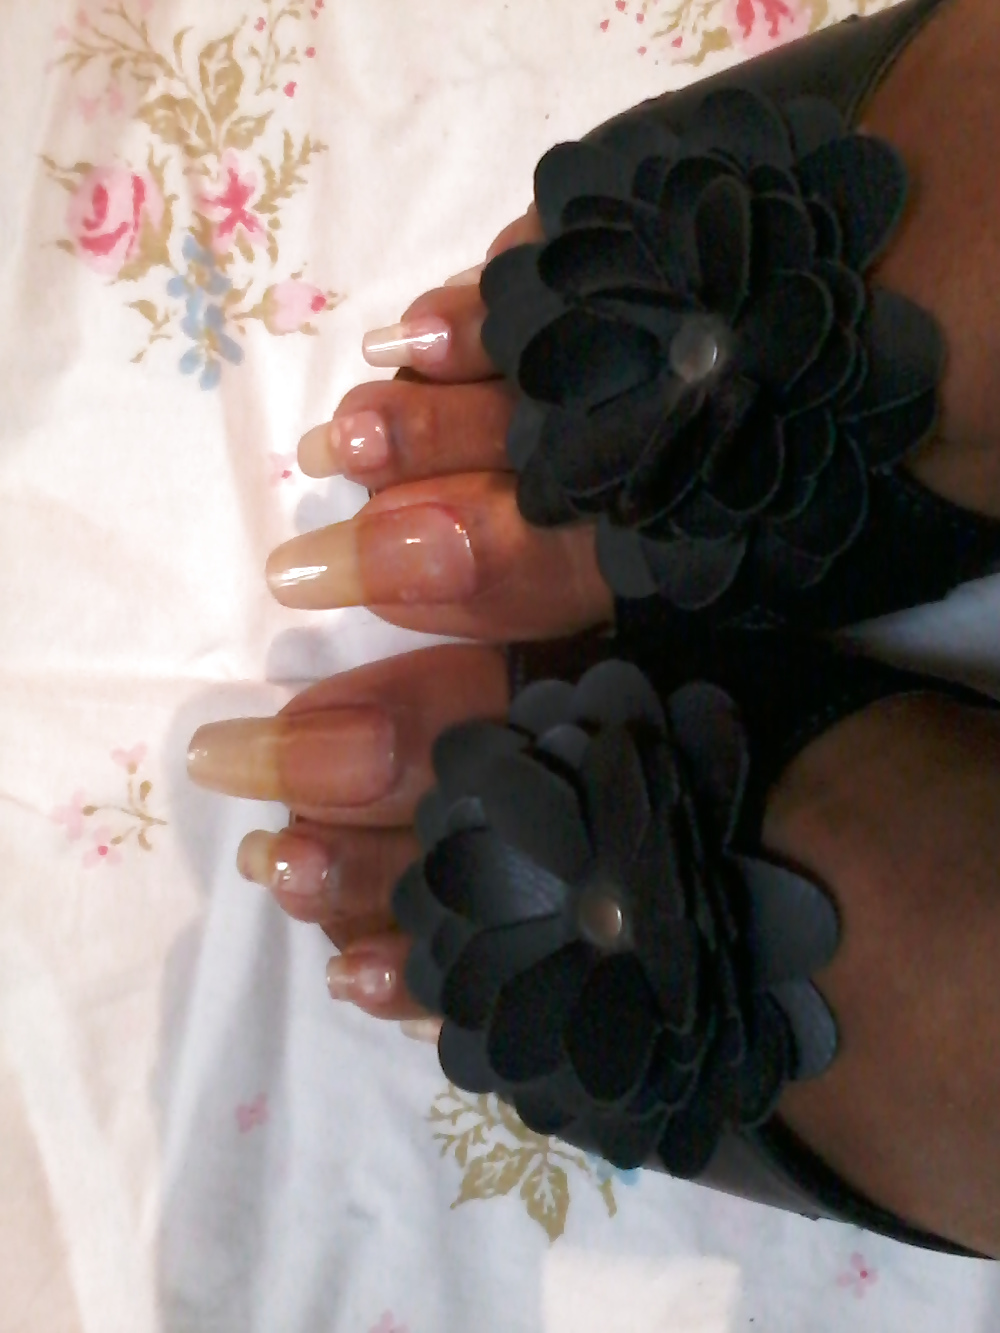 Black chicks with long nails and long toenails 2 #15003296